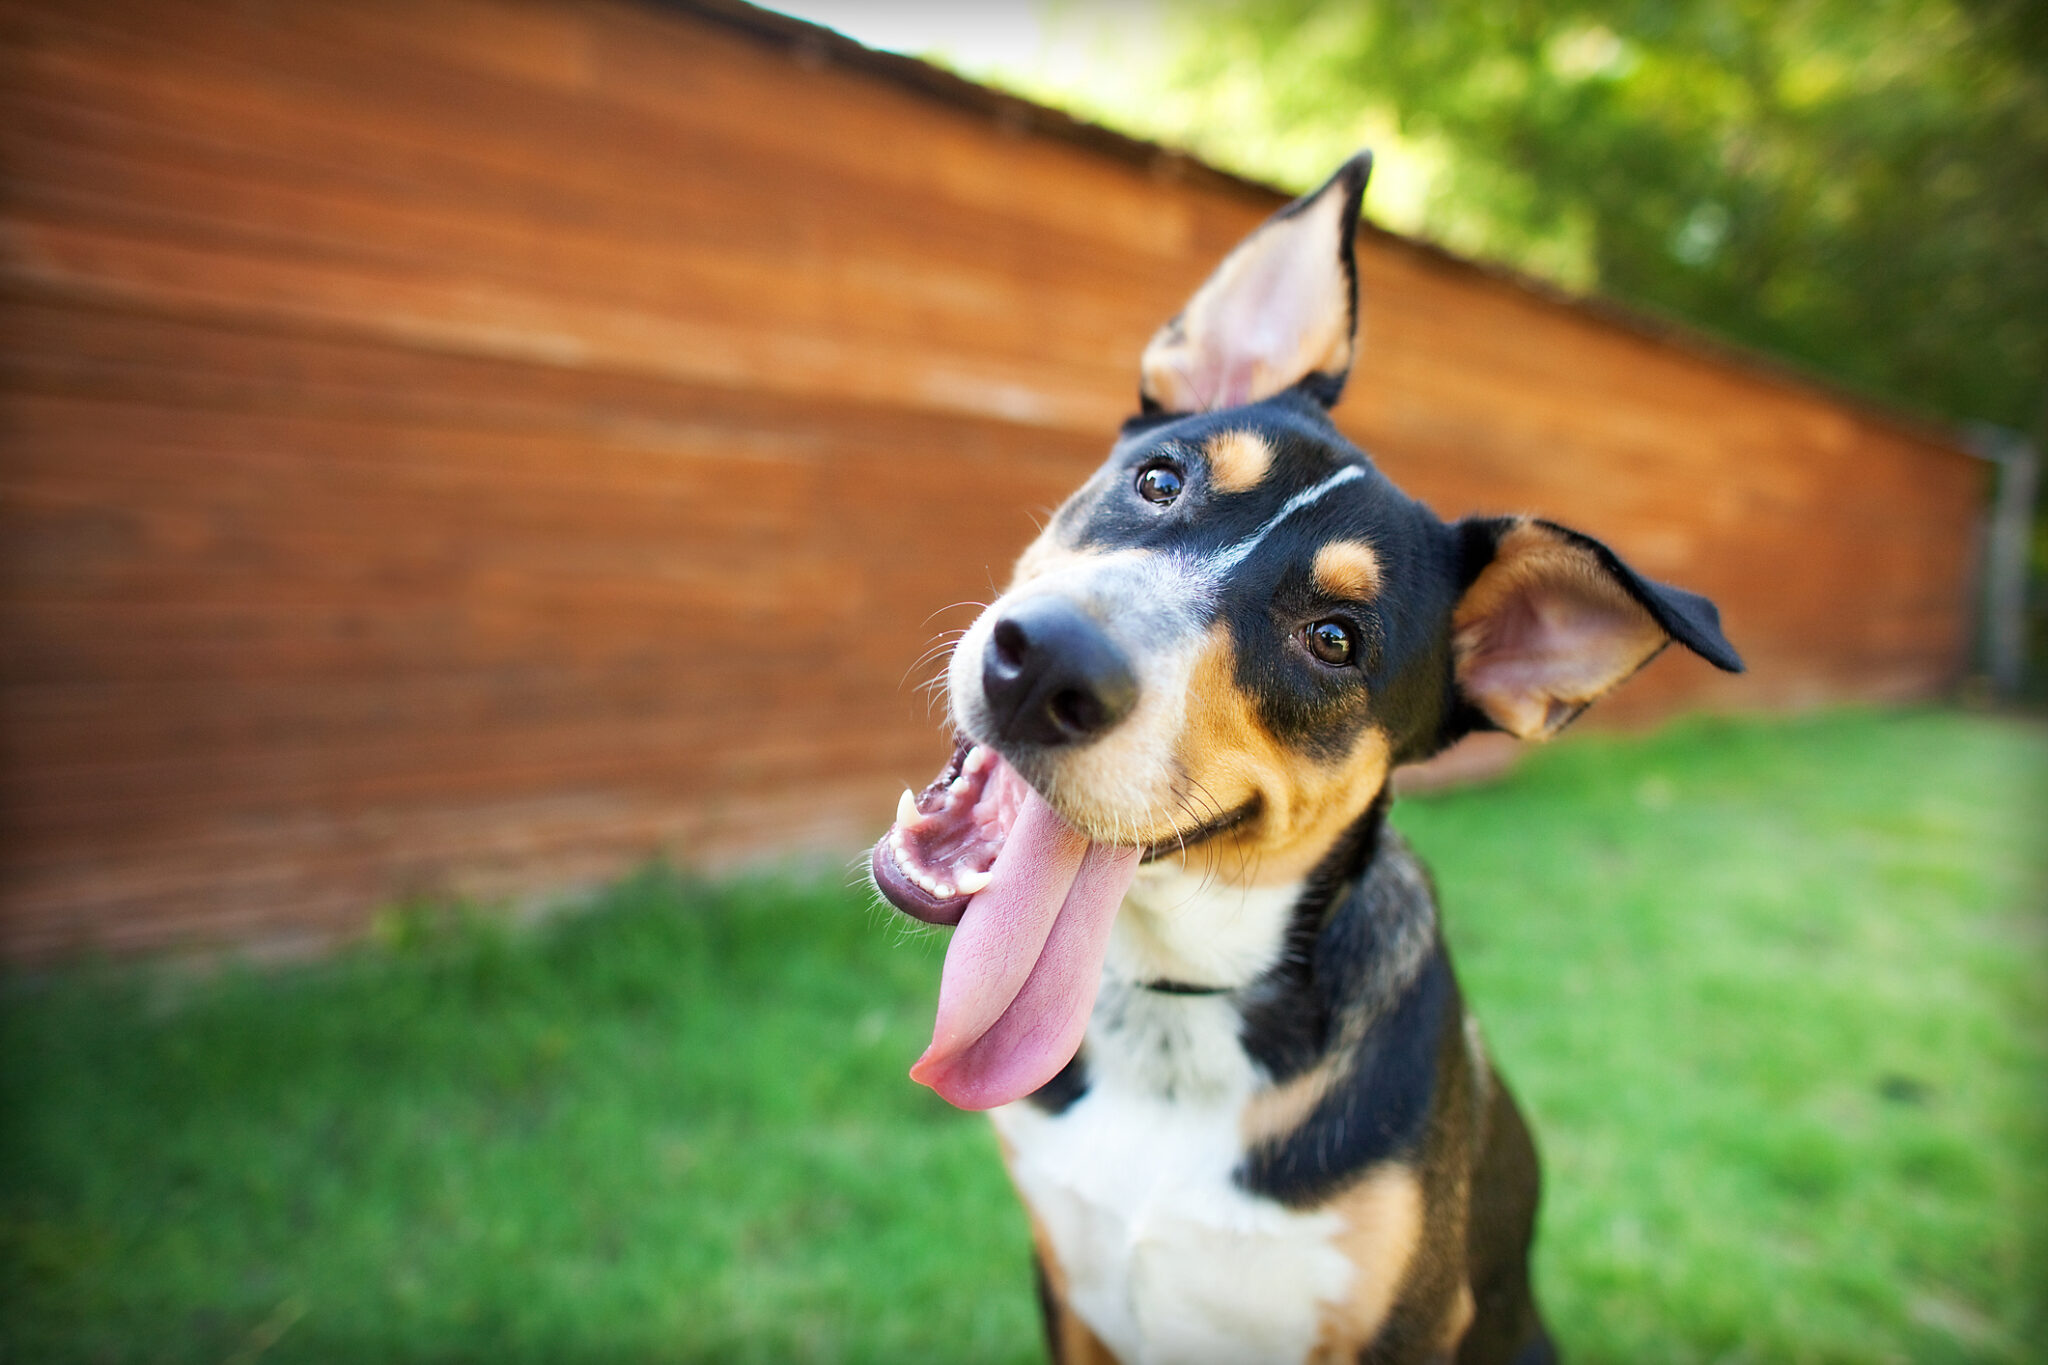 bladder infection in dogs in davenport ia